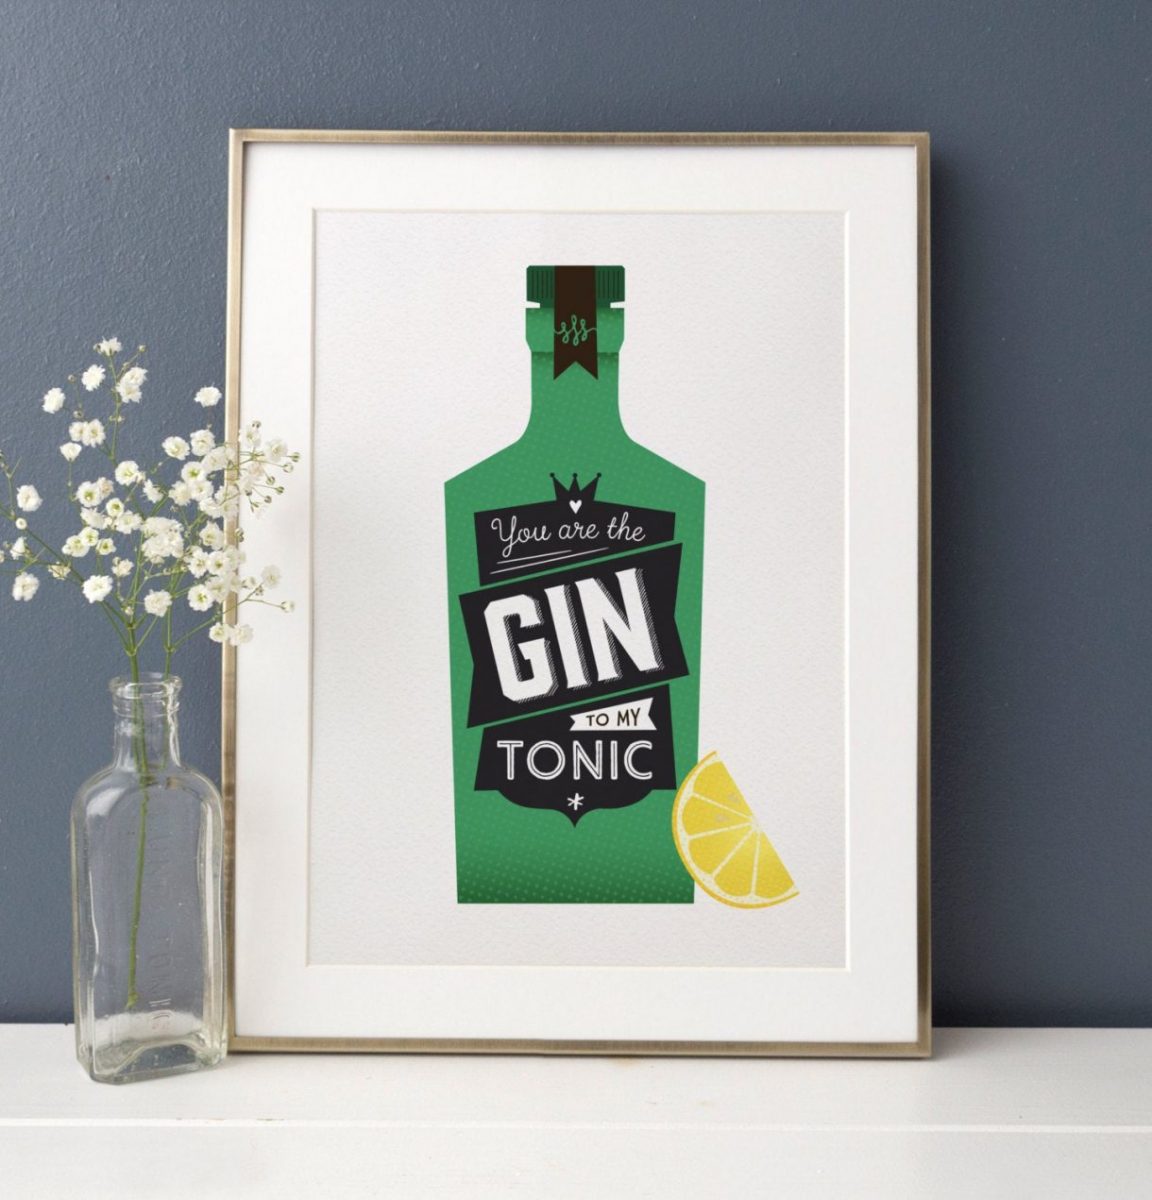 Gin & Tonic Print, Cocktail Poster, Retro Kitchen Print, You are the Gin To My Tonic, Vintage Design, Anniversary Gift, Gin Gift for Her